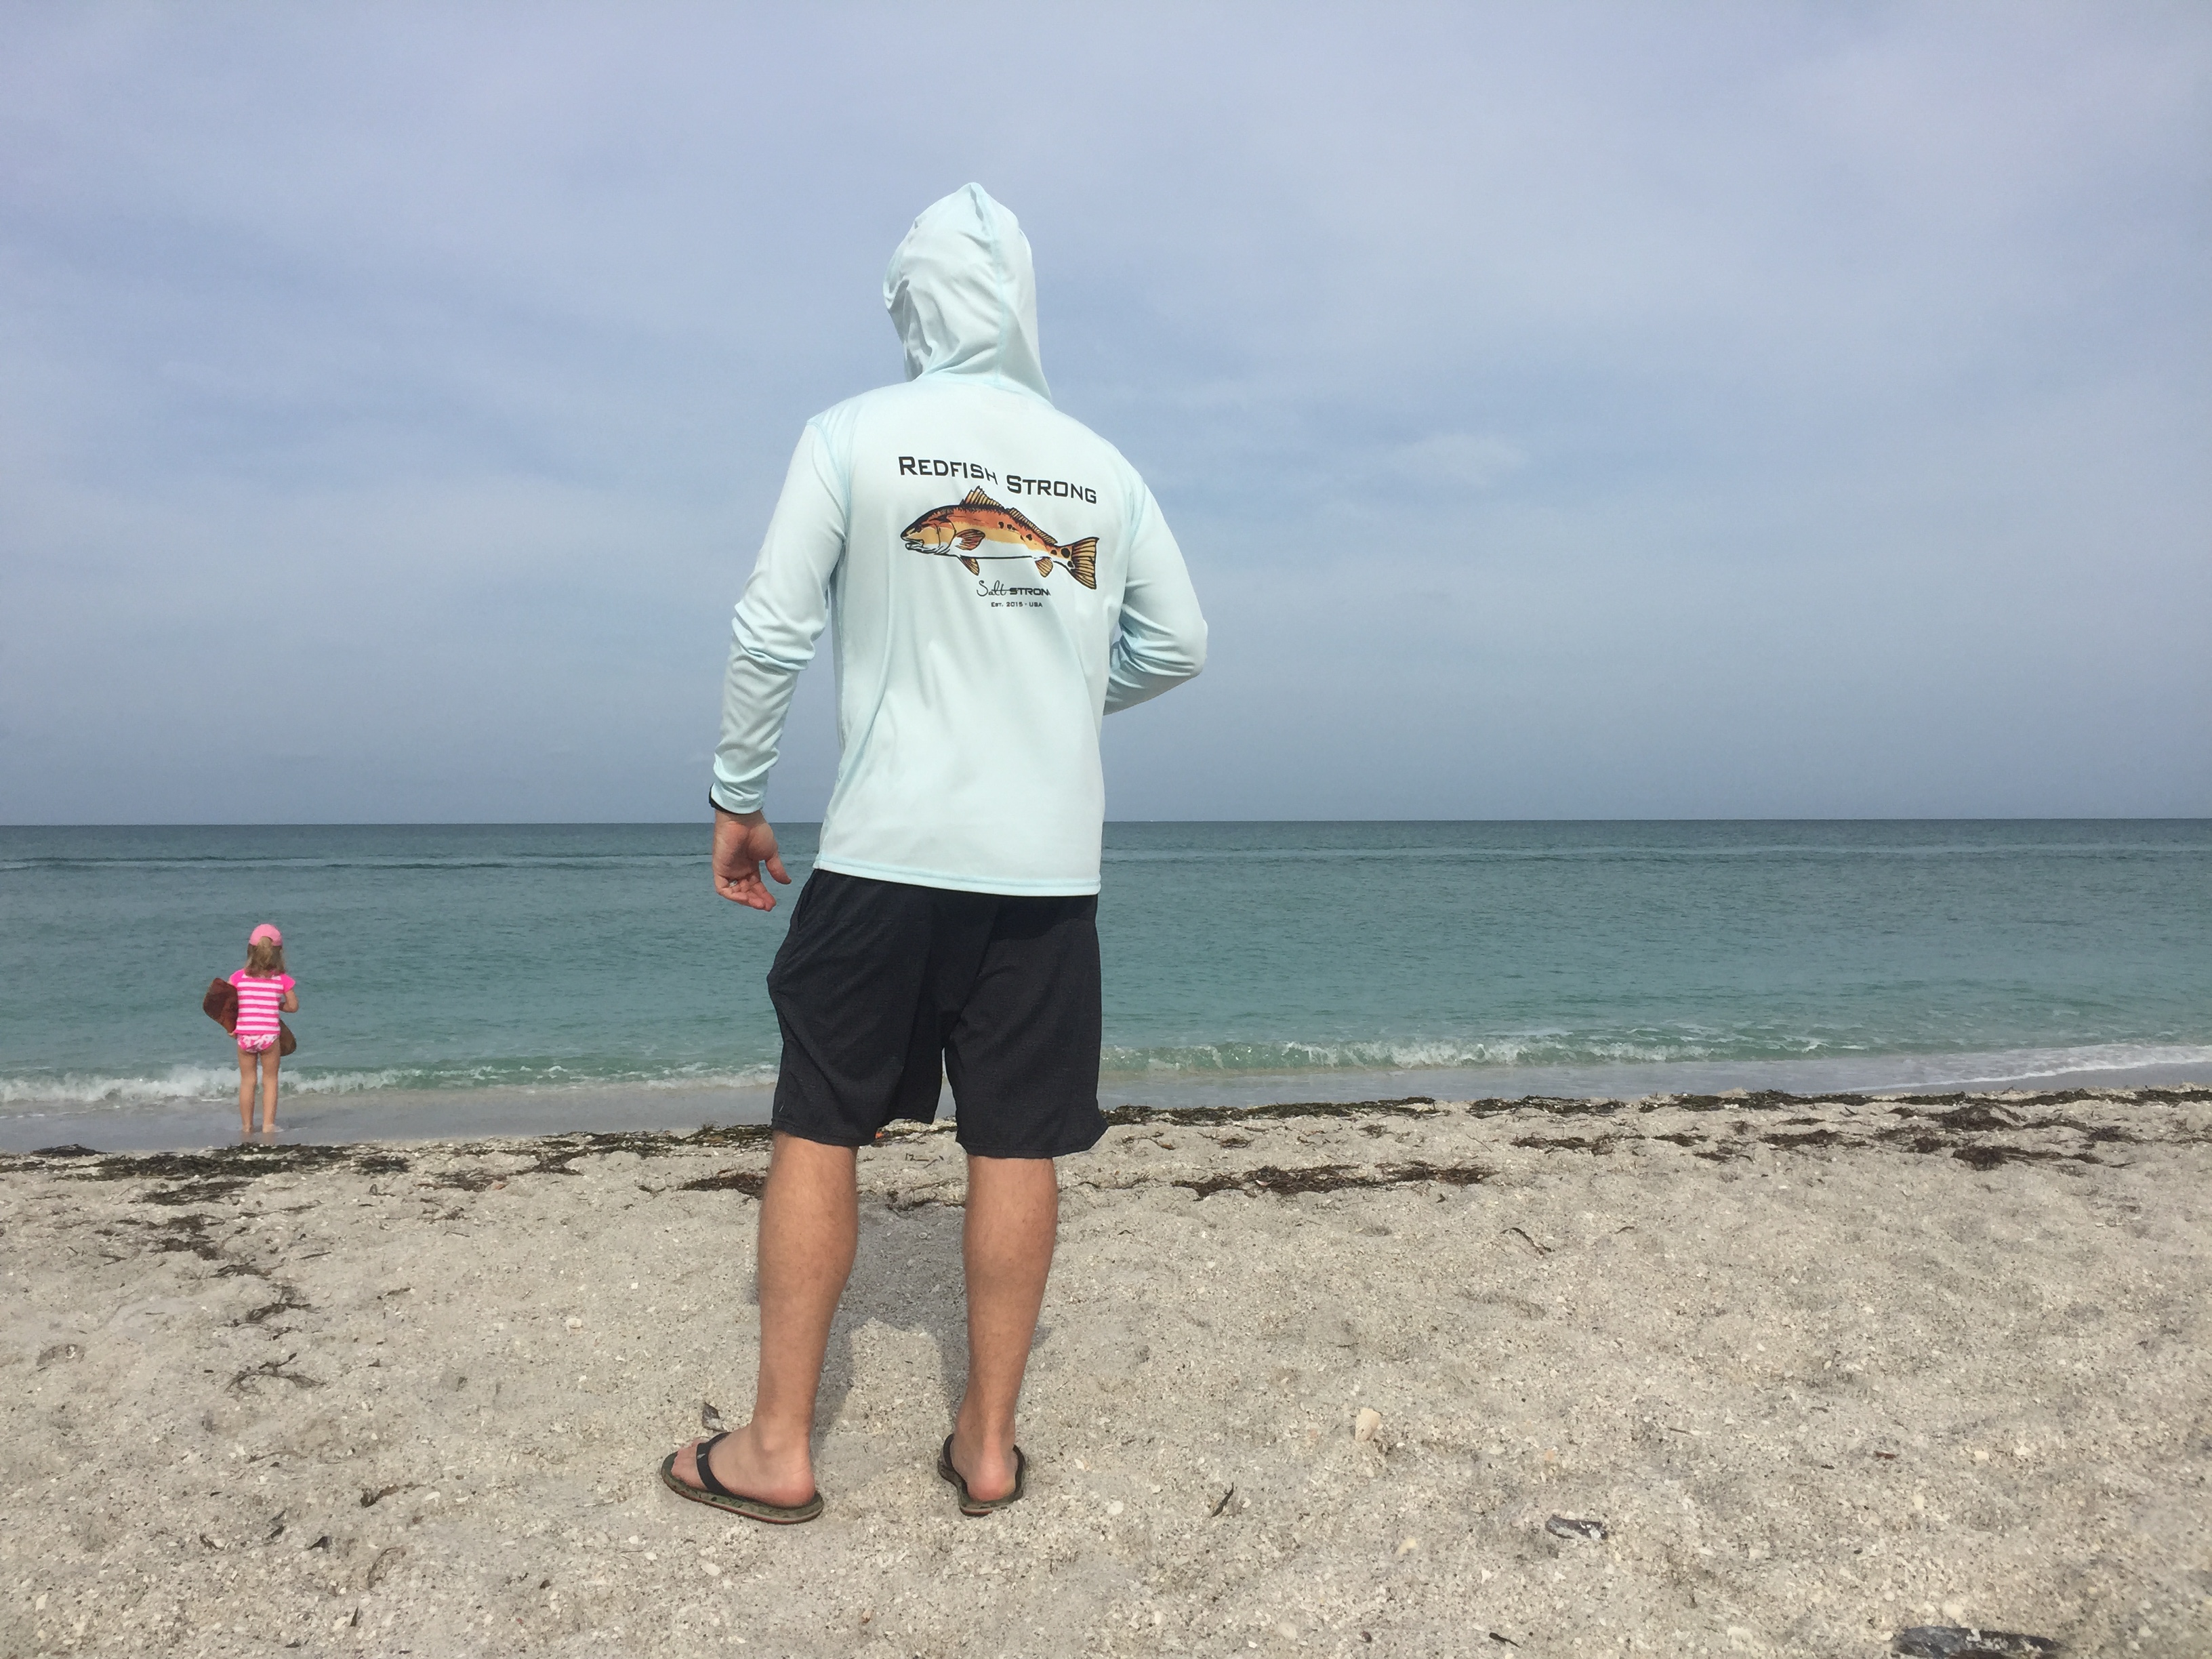 redfish wink redfish strong hoodie contest